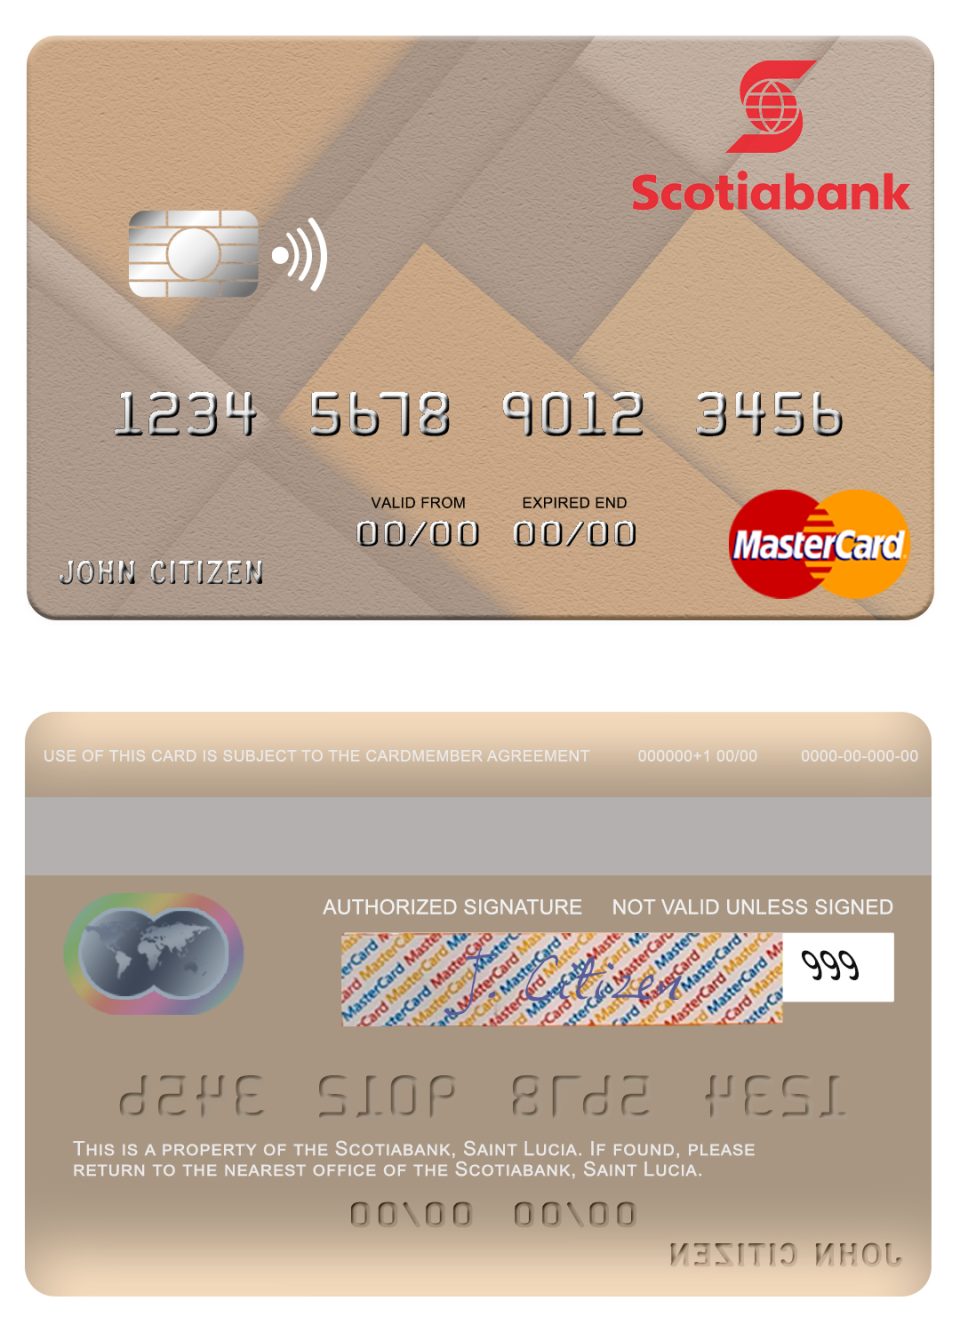 Editable Saint Lucia Scotiabank mastercard credit card Templates in PSD Format